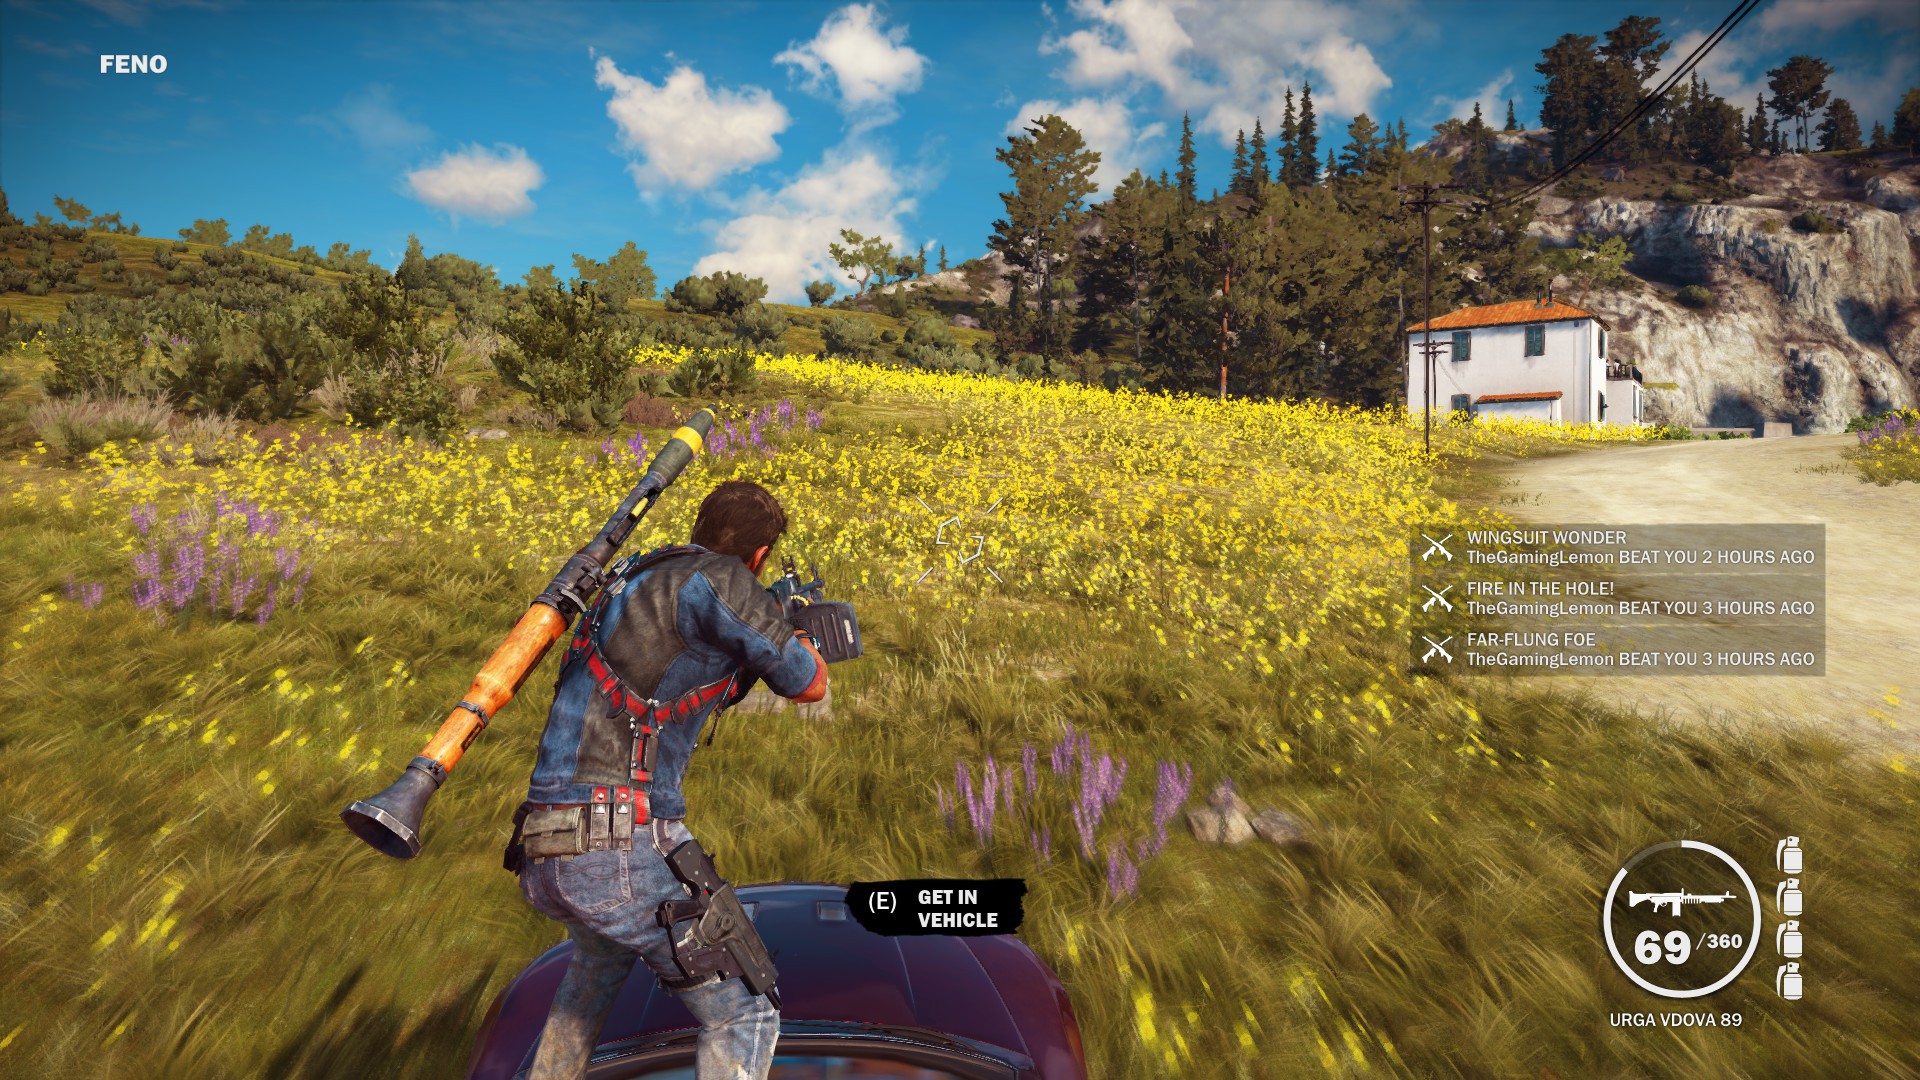 just cause 3 multiplayer packages